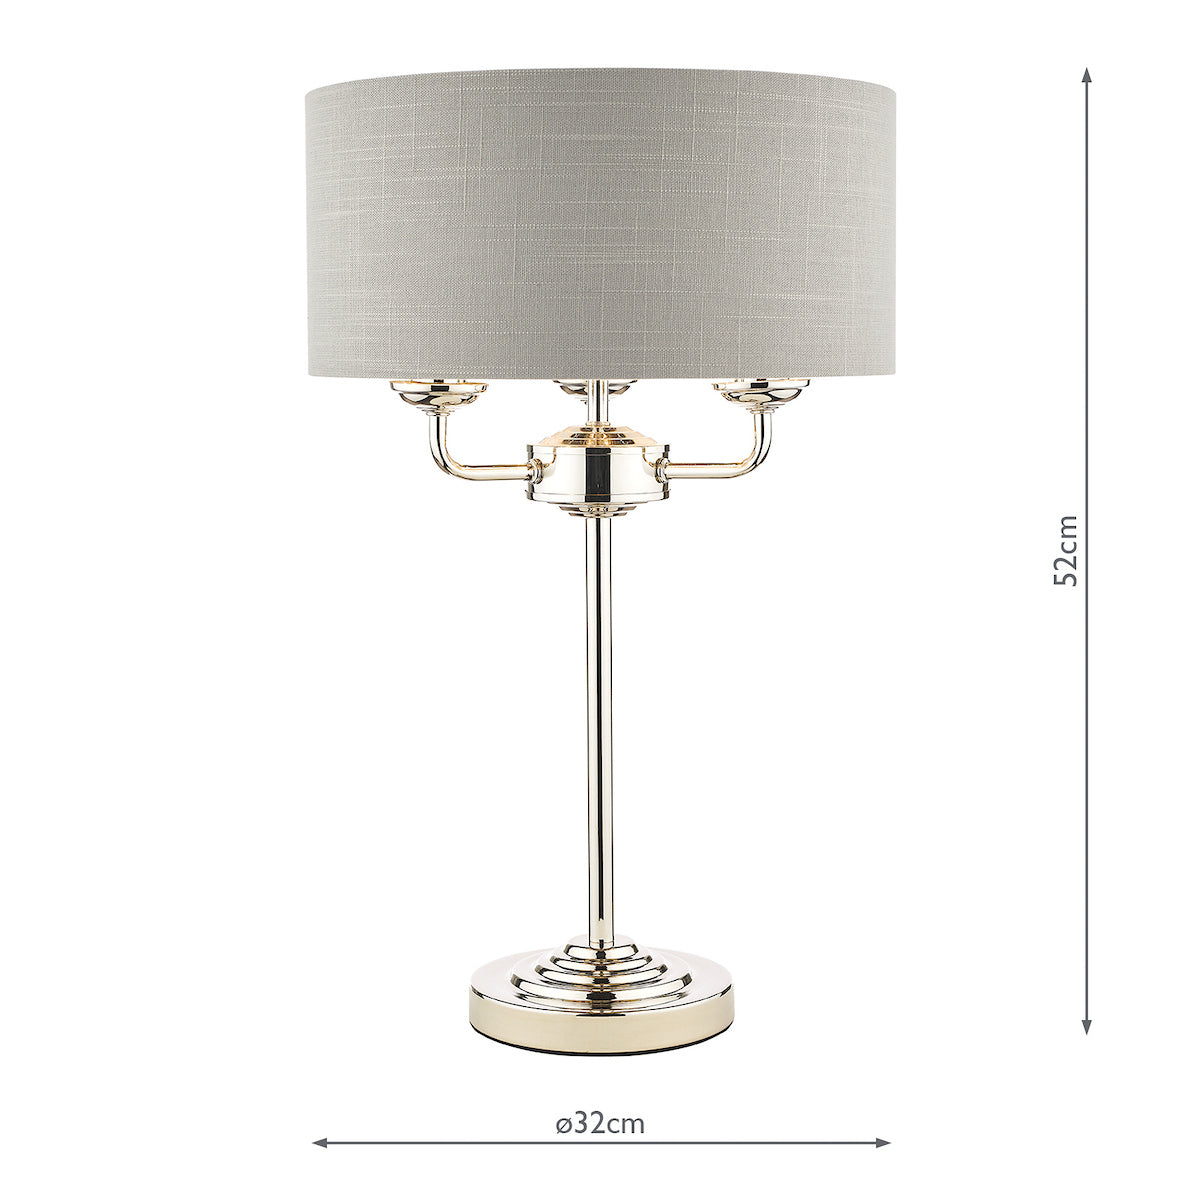 Laura Ashley Sorrento Polished Nickel 3 Light LA3718286-Q   Table Lamp with Silver Shade